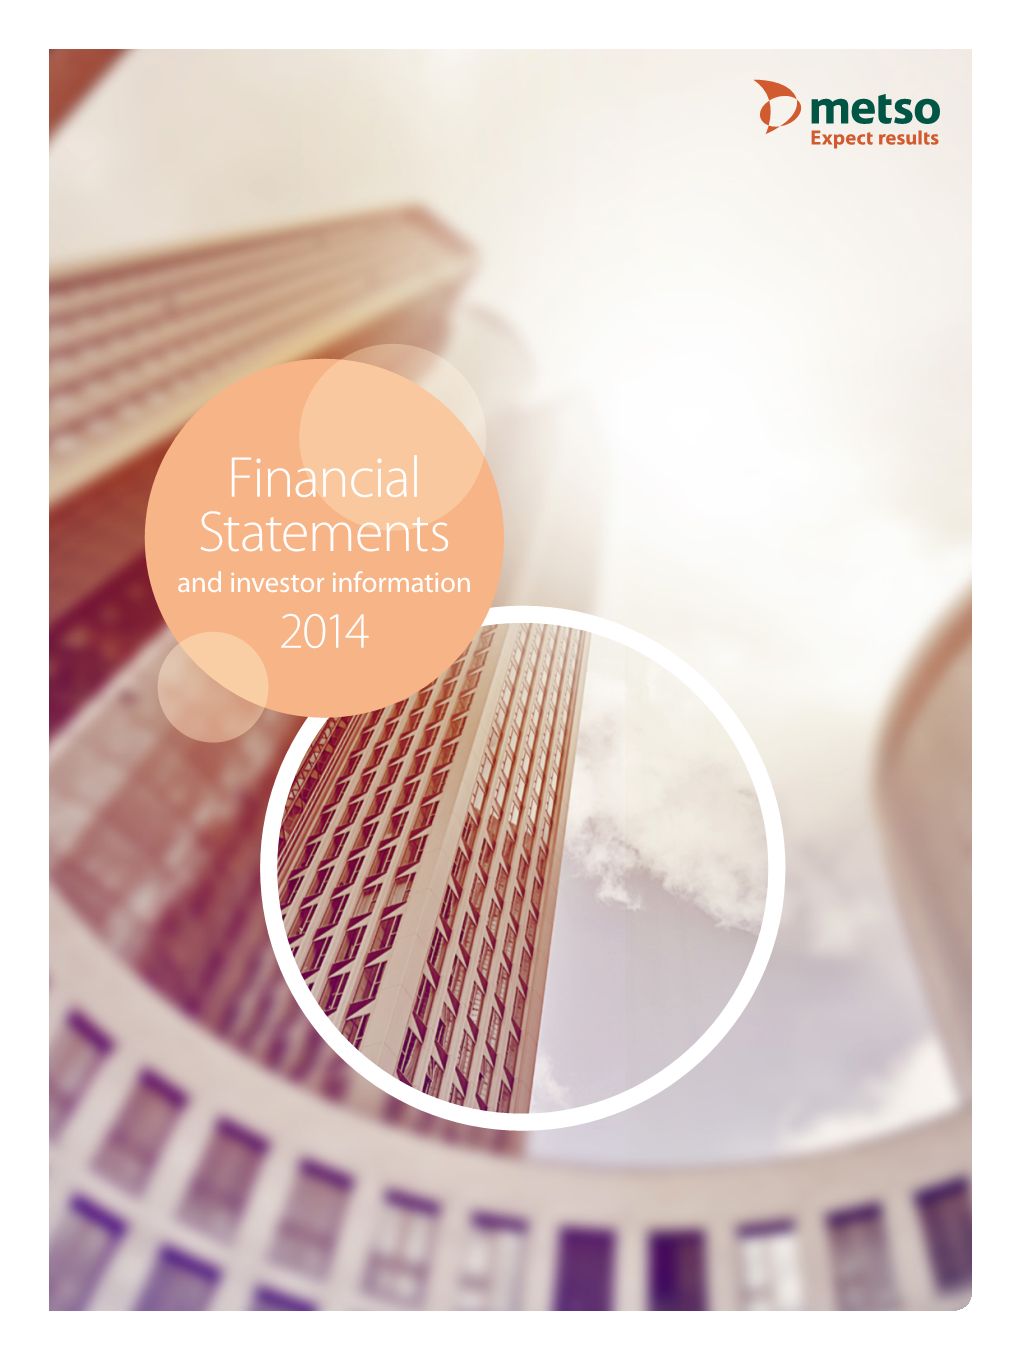 Financial Statements 2014 Have Been Published and Printed in Strategy, We Also Updated the Company’S Financial Targets Aiming for English and Finnish